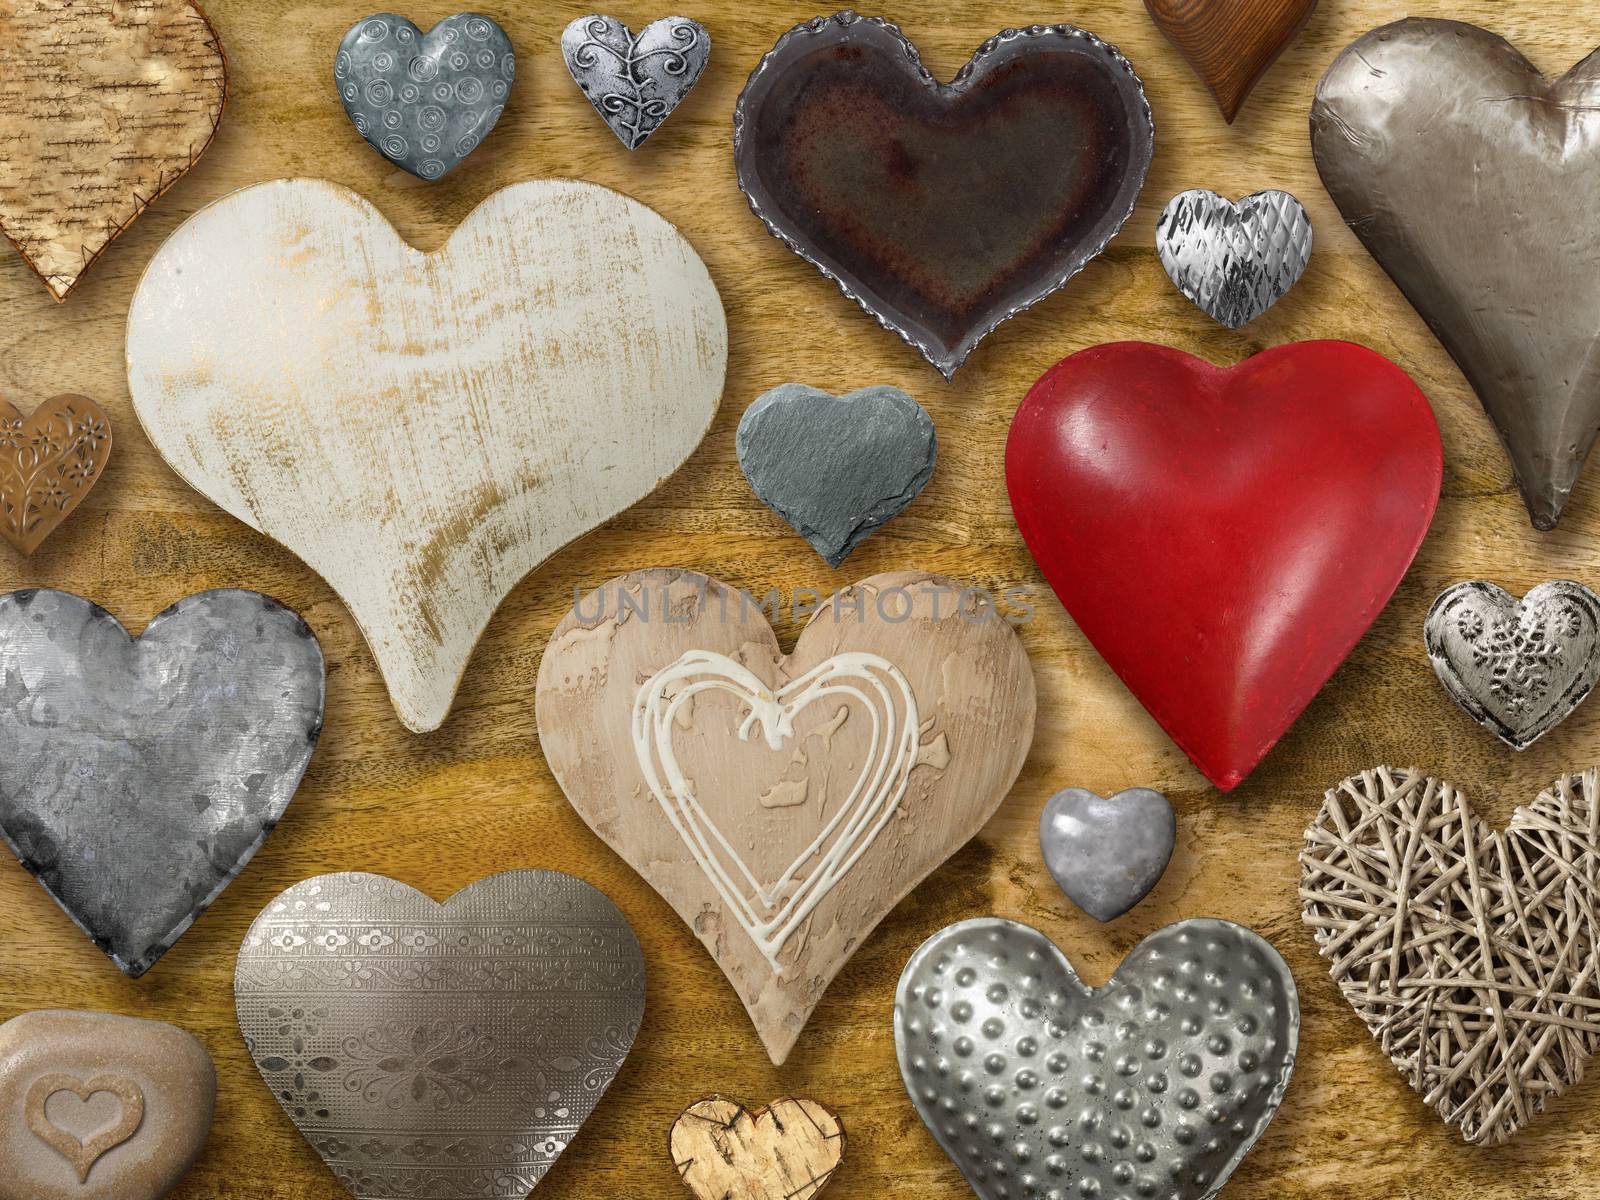 Photos of many heart-shaped things made of stone, metal and wood on wood background.